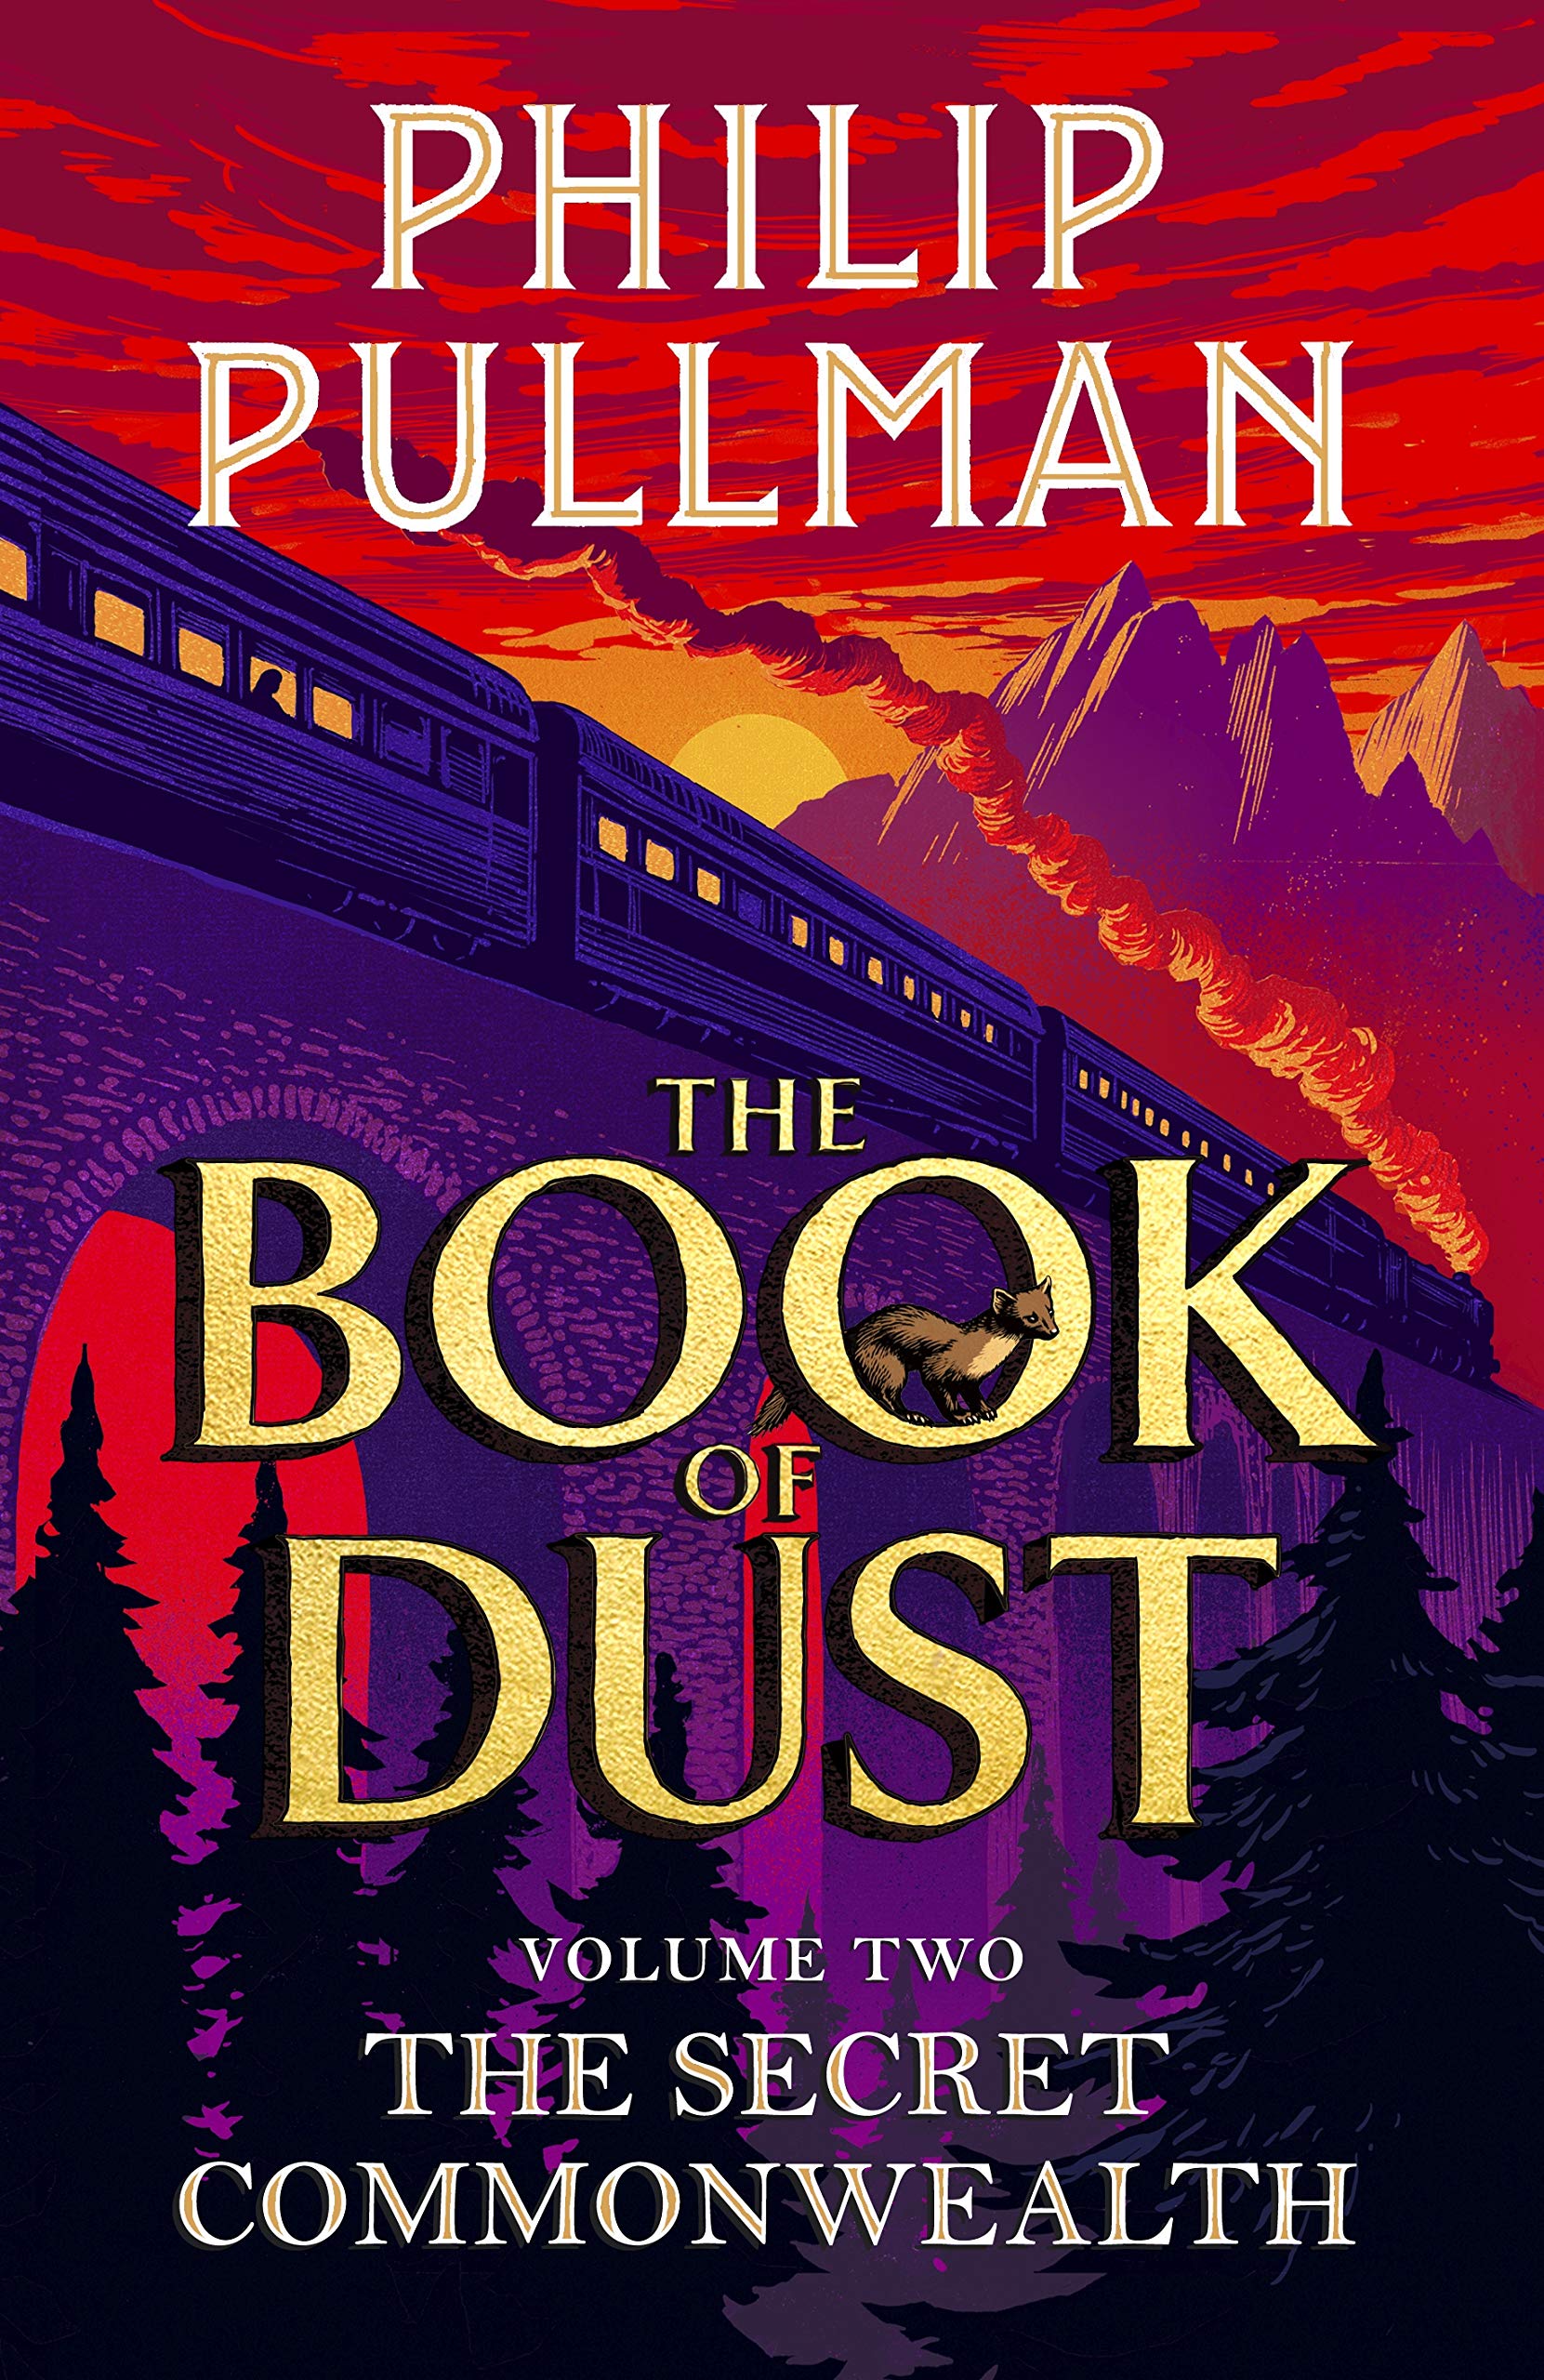 Pullman, Philip - The Secret Commonwealth: The Book of Dust Volume Two (Book of Dust 2)